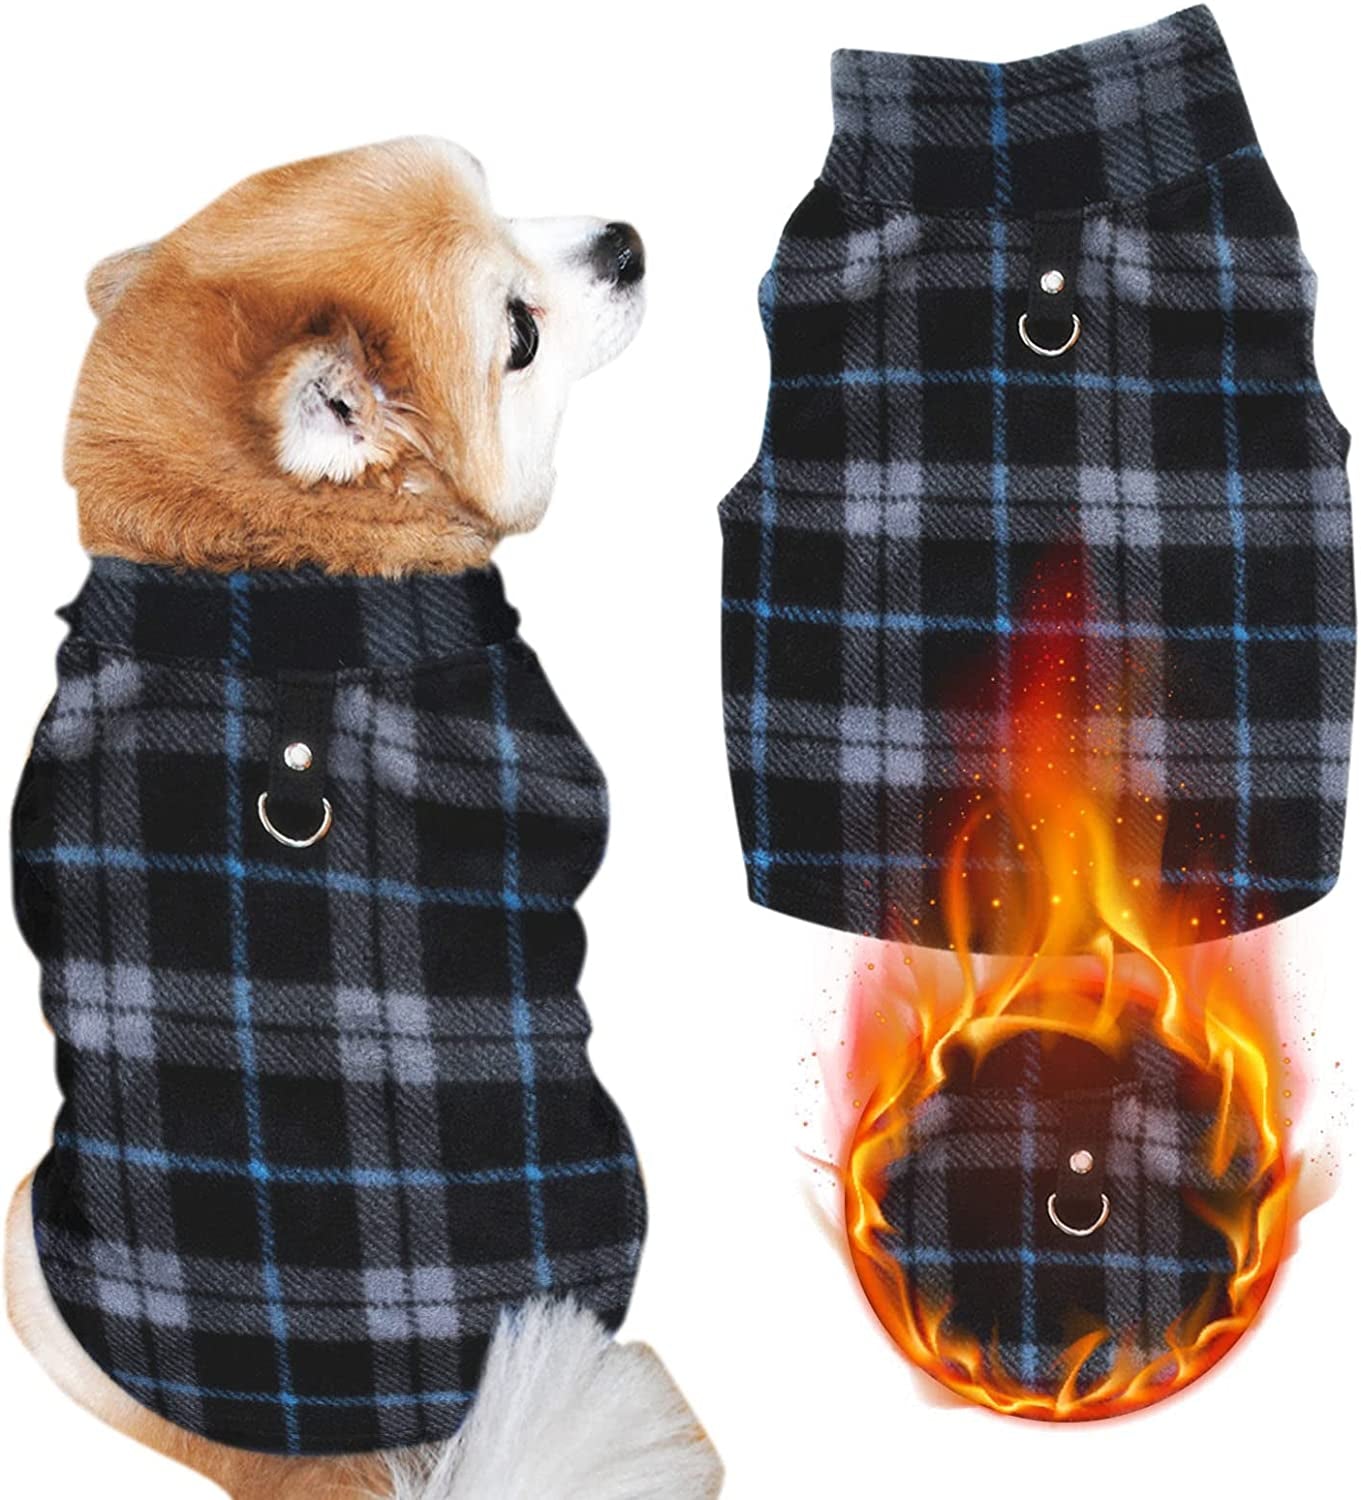 Pet Clothes for Small Dogs Male Sweater Holiday Puppy Costume Warm Dog Clothes Small Puppy Small and Medium Teddy